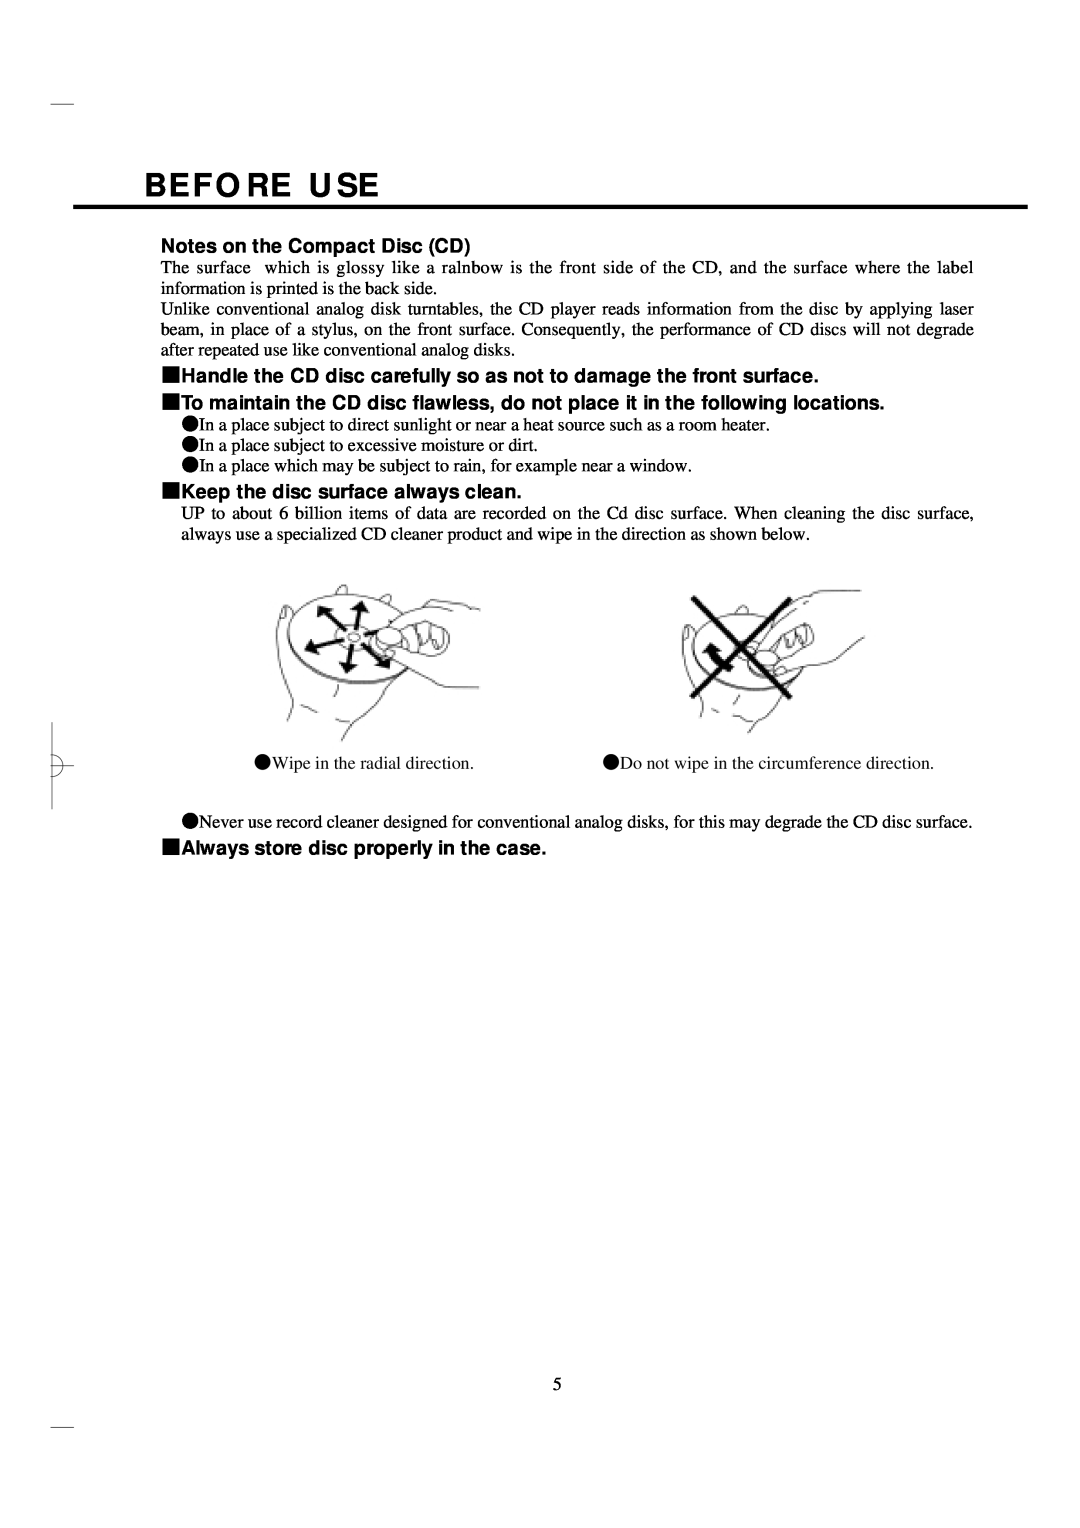 Vestax CDX-35P, CDX-35C owner manual Before Use, Notes on the Compact Disc CD, Keep the disc surface always clean 